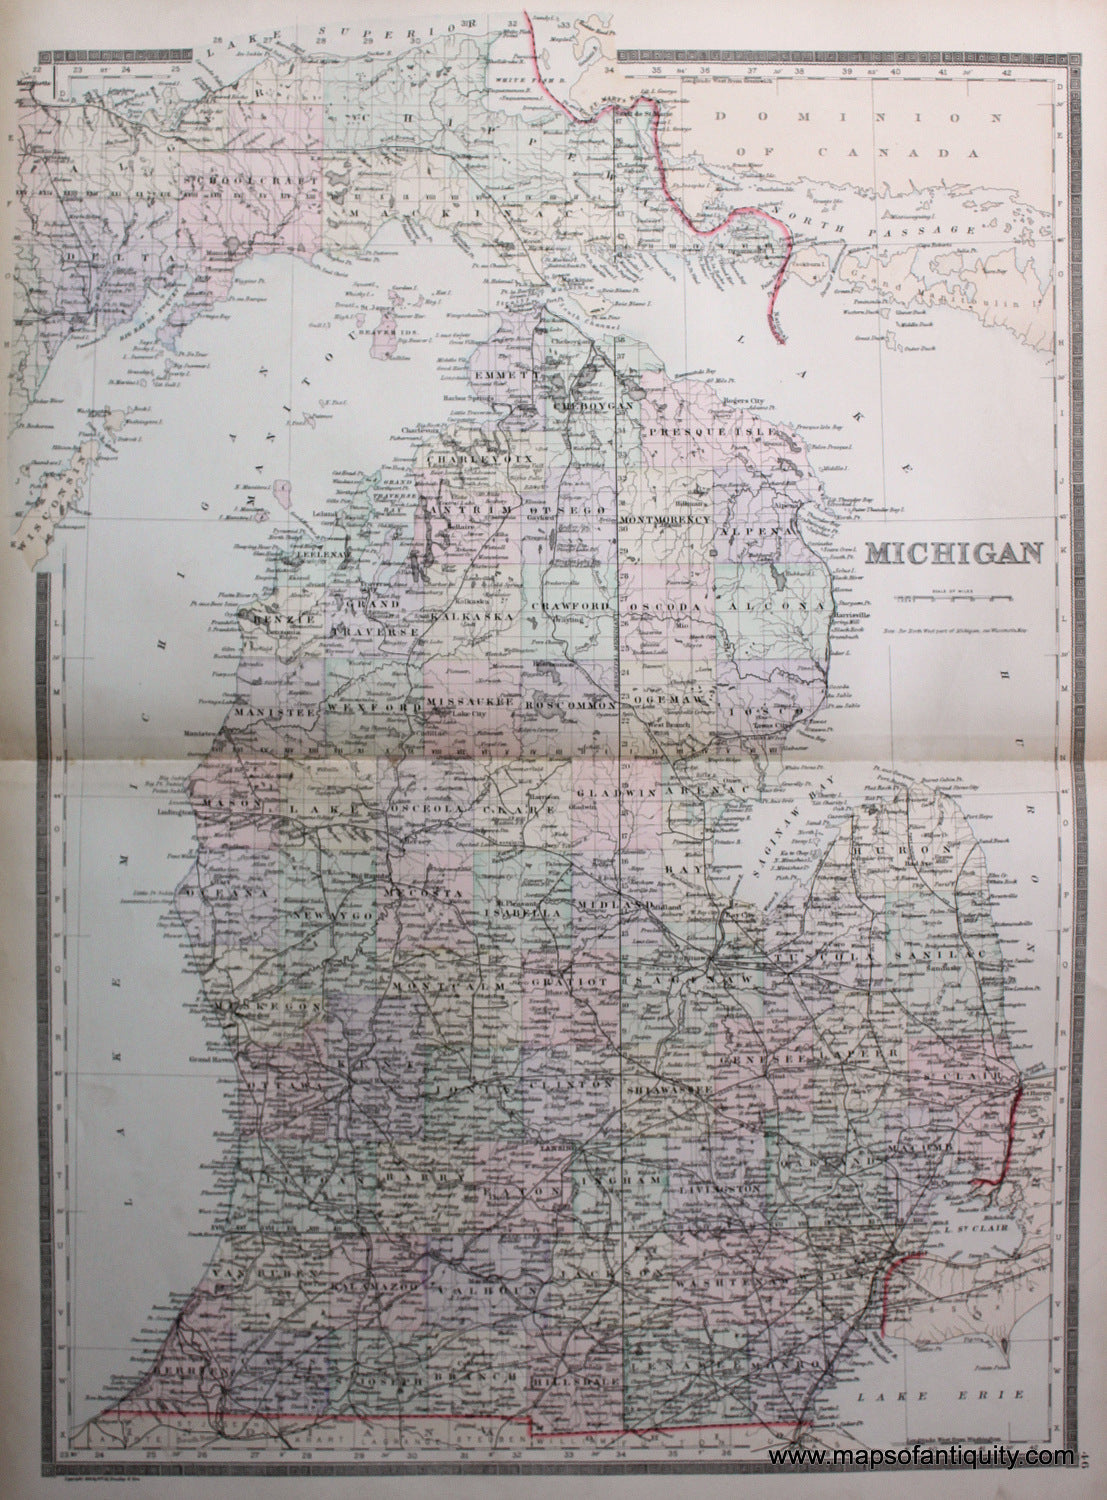 Antique-Hand-Colored-Map-Michigan-******-United-States-Mid-West-1887-Bradley-Maps-Of-Antiquity